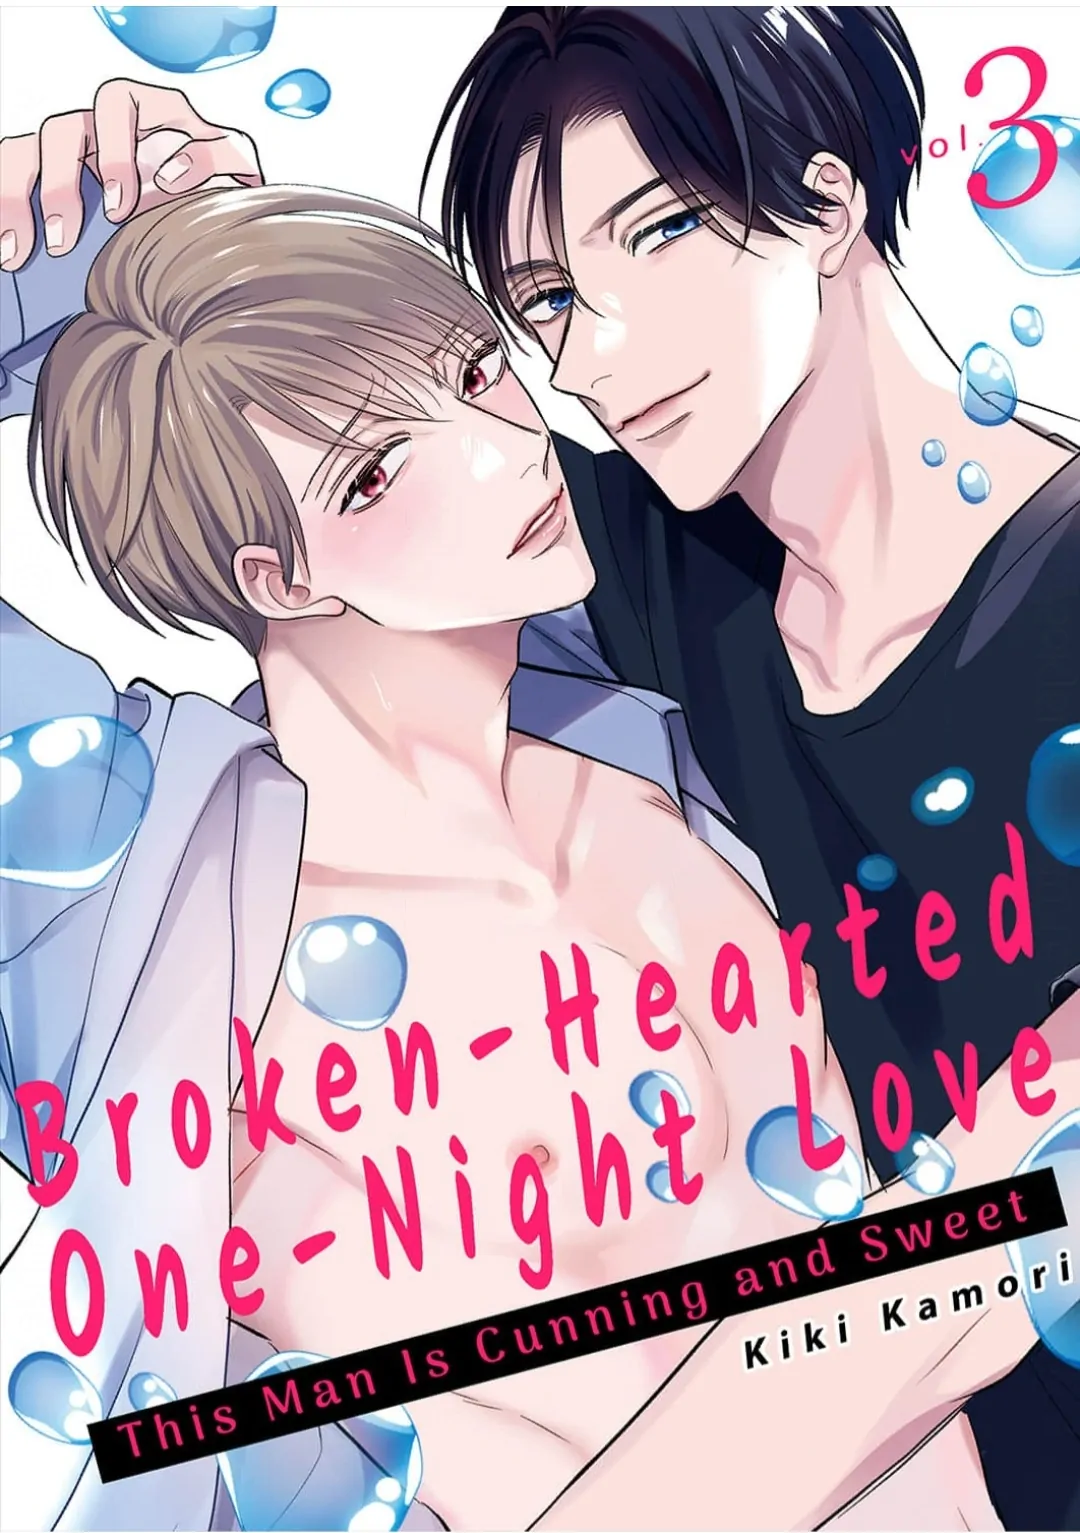 Broken-Hearted One-Night Love ~This Man Is Cunning and Sweet~ - chapter 3 - #1